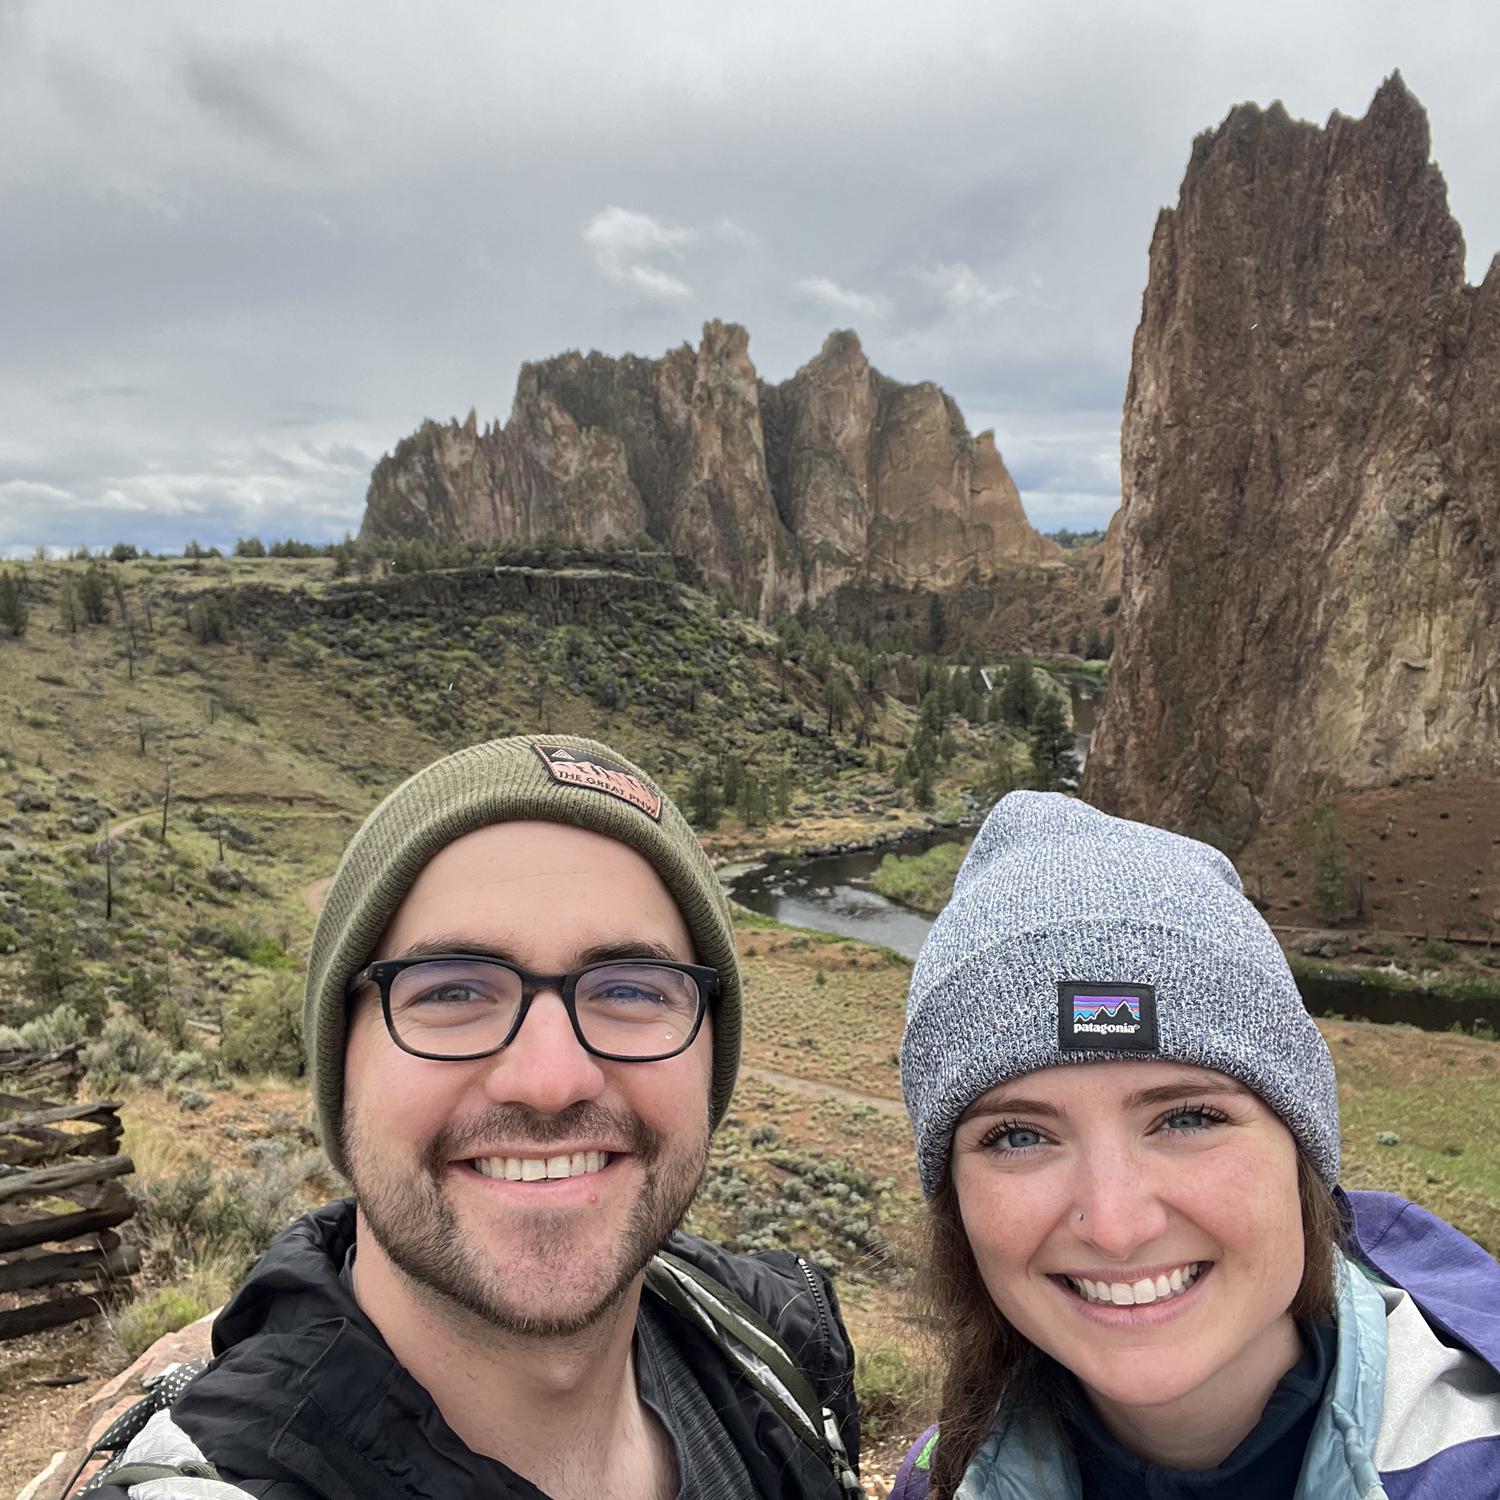 Smith Rock State Park to kick off our annual June Camping trip, 2022